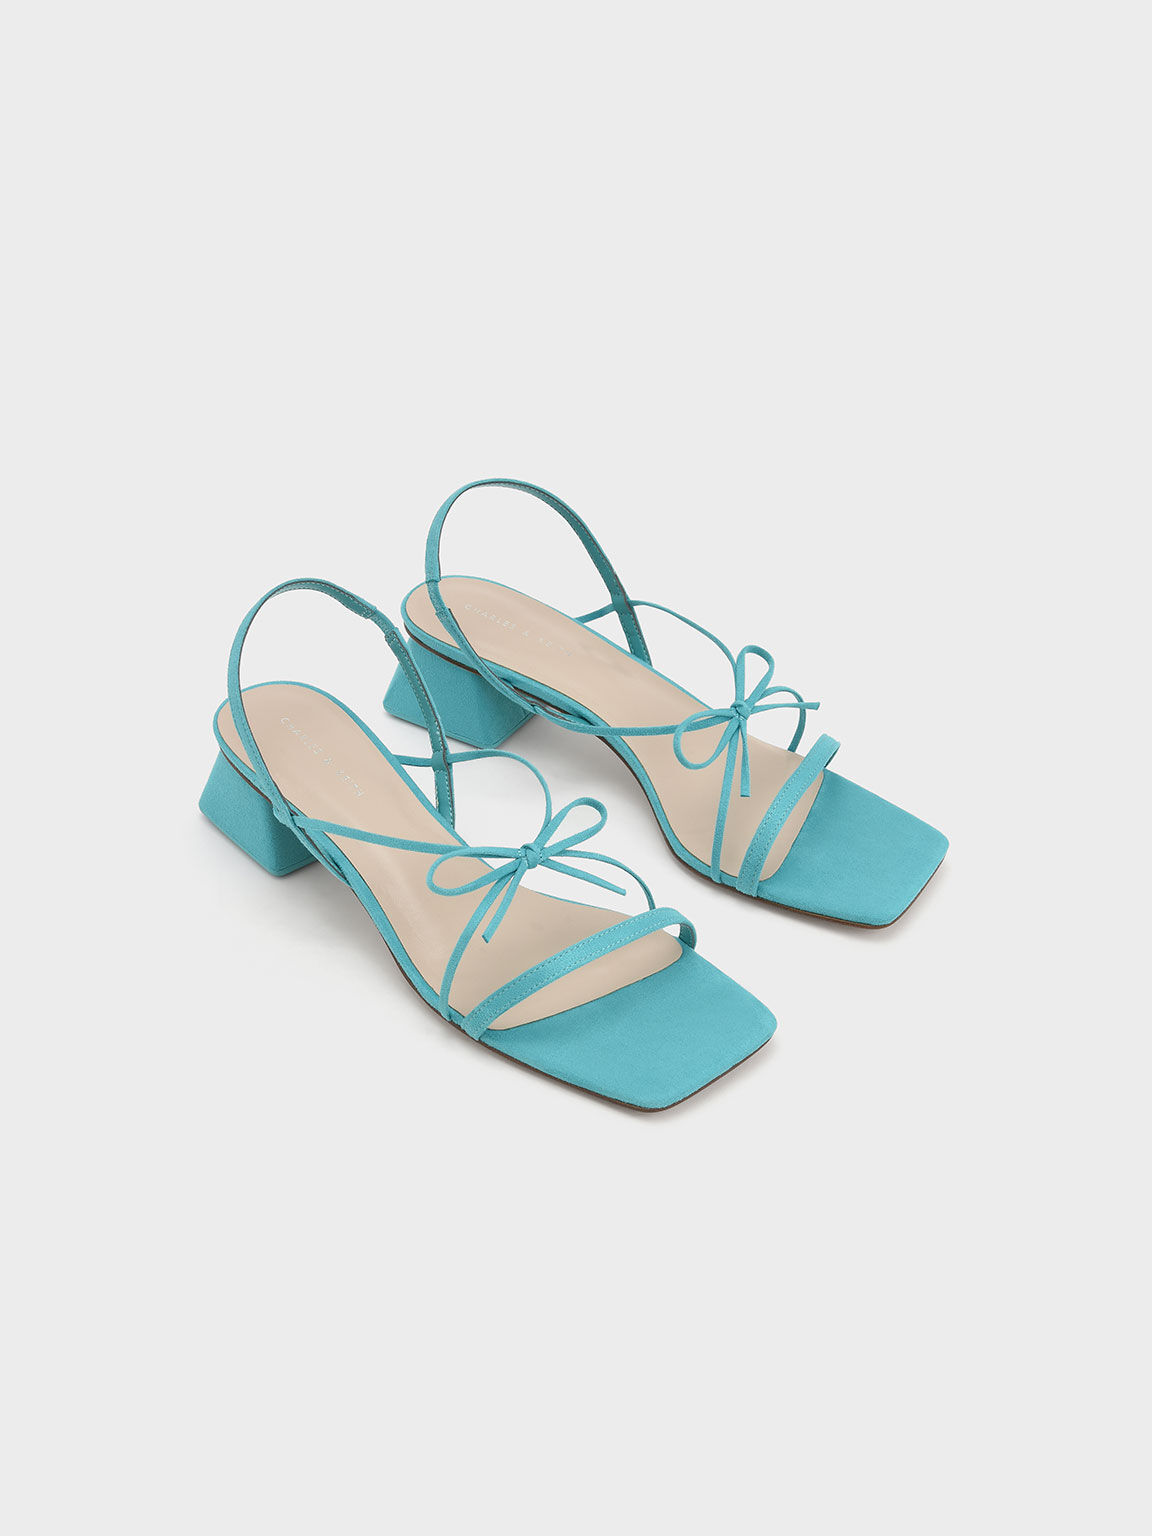 Strappy Bow Textured Slingback Sandals, Turquoise, hi-res